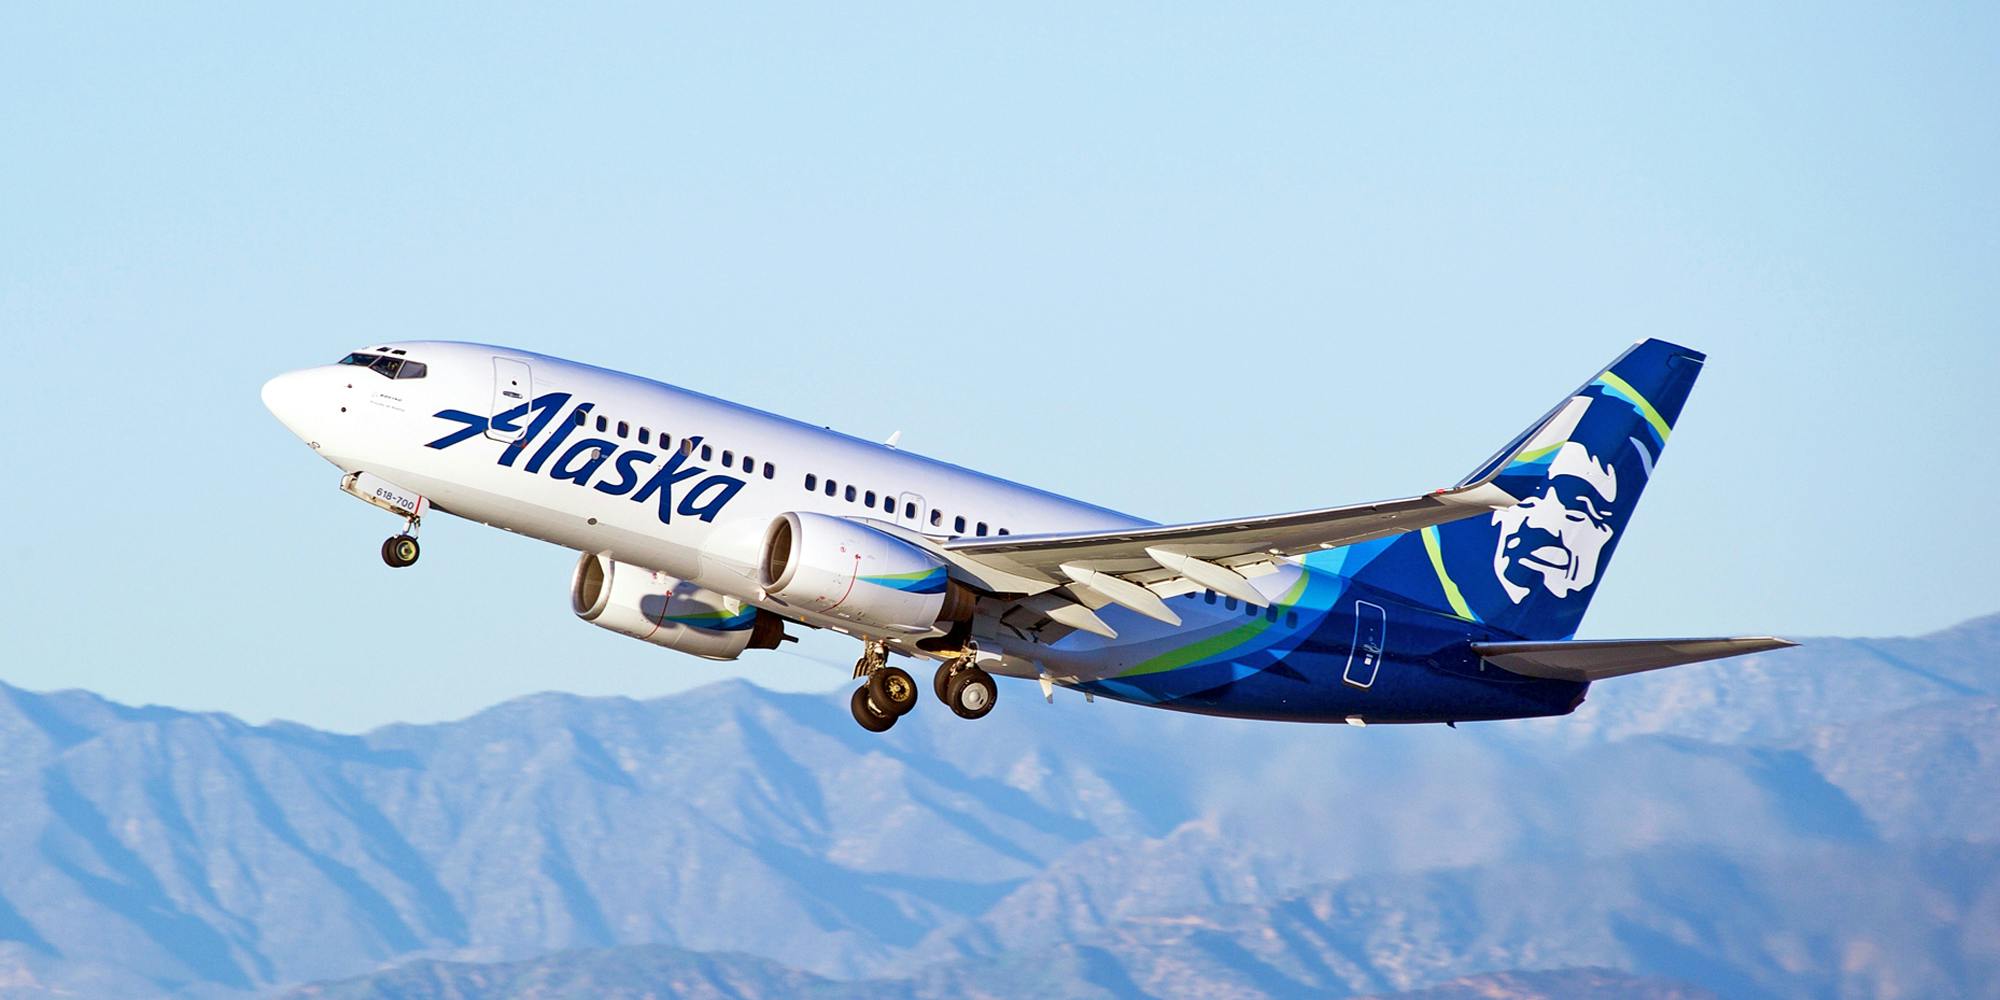 ‘A complete stranger helped him’: Woman says Alaska Airlines lost her son